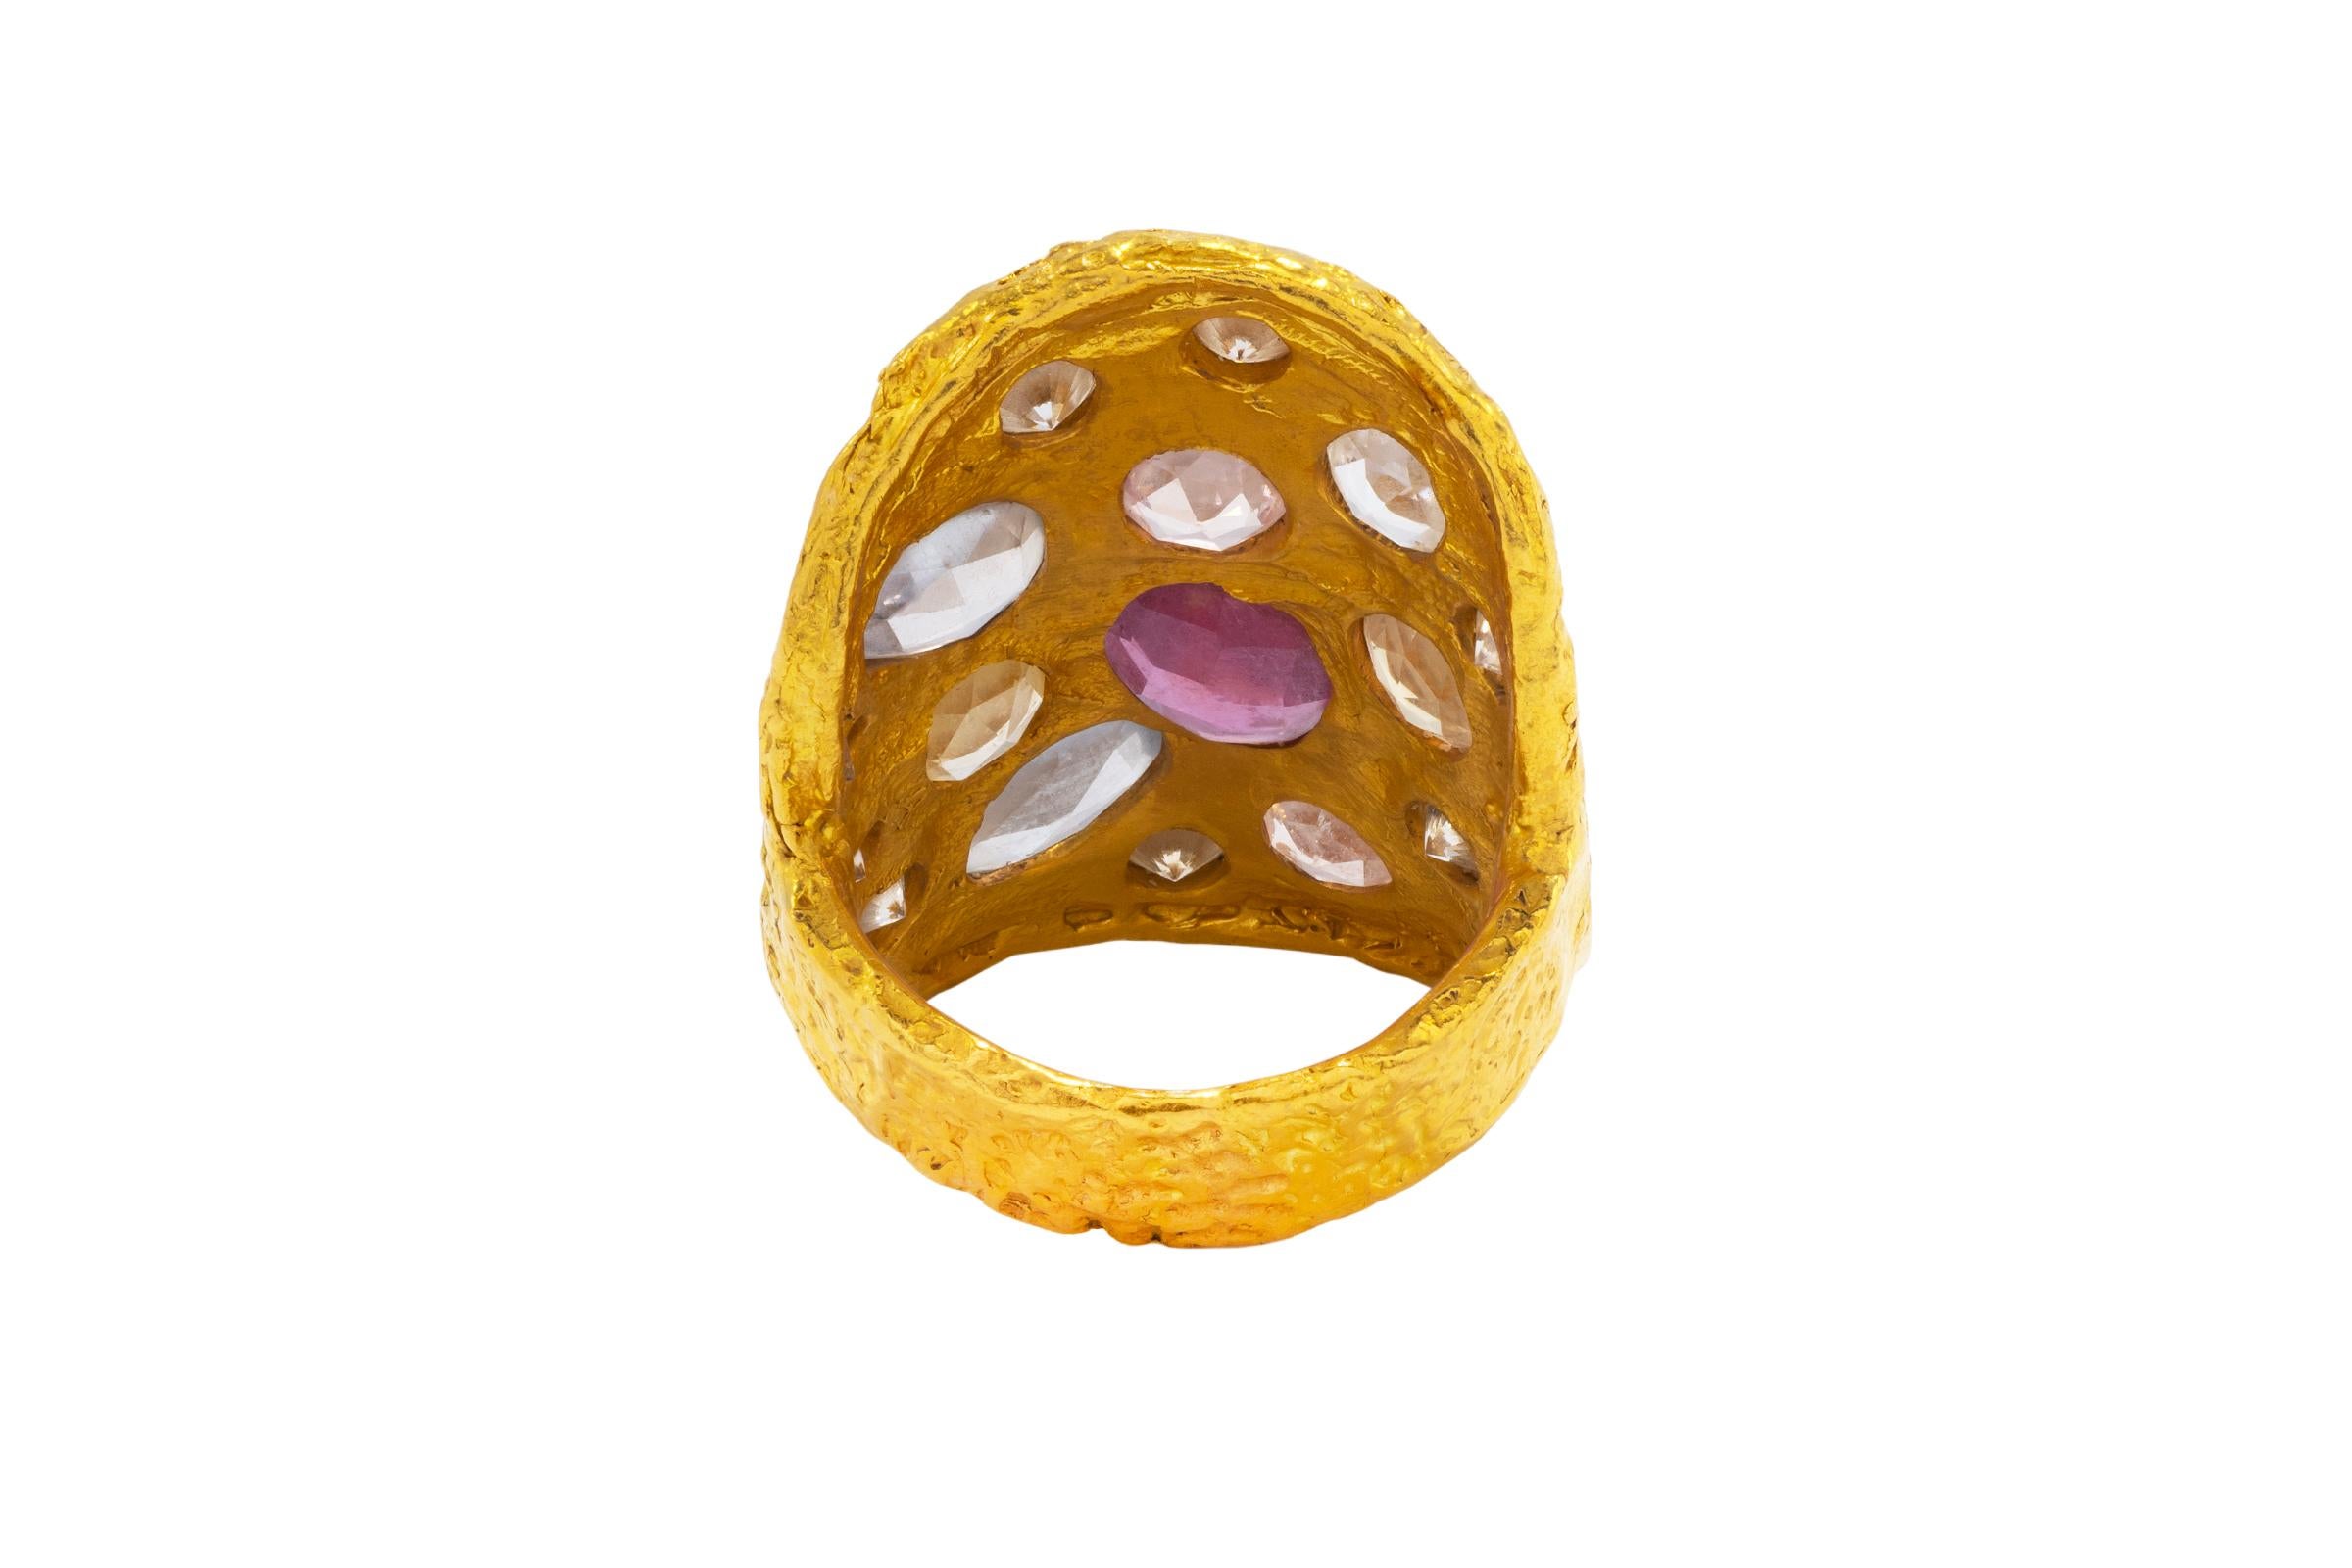 Artisan The Venus Diamond and Sapphire Cocktail Ring in 22k Gold by Tagili For Sale